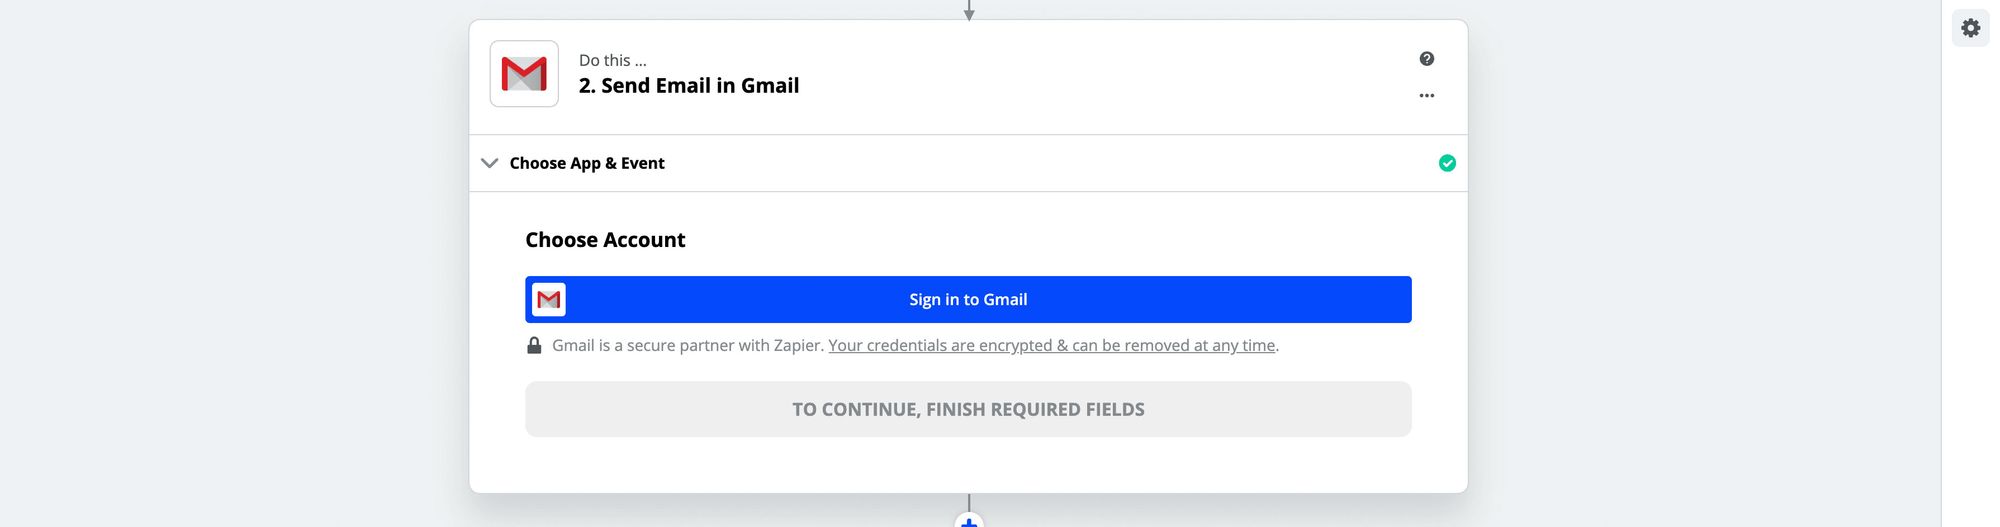 zapier-sign-in-to-gmail